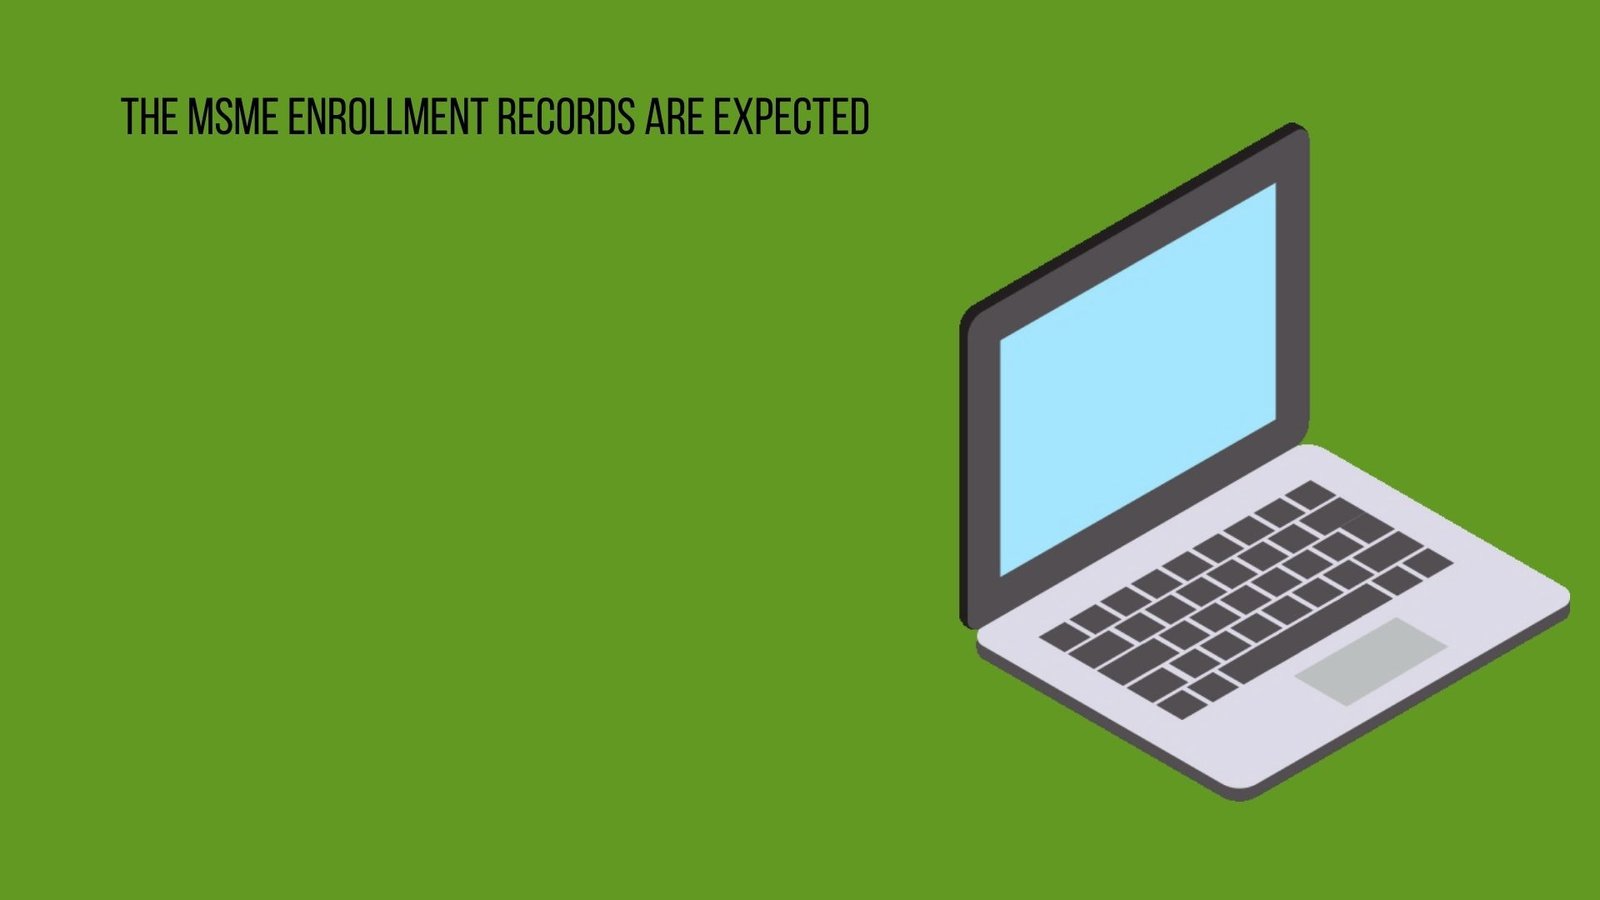 The MSME enrollment records are expected